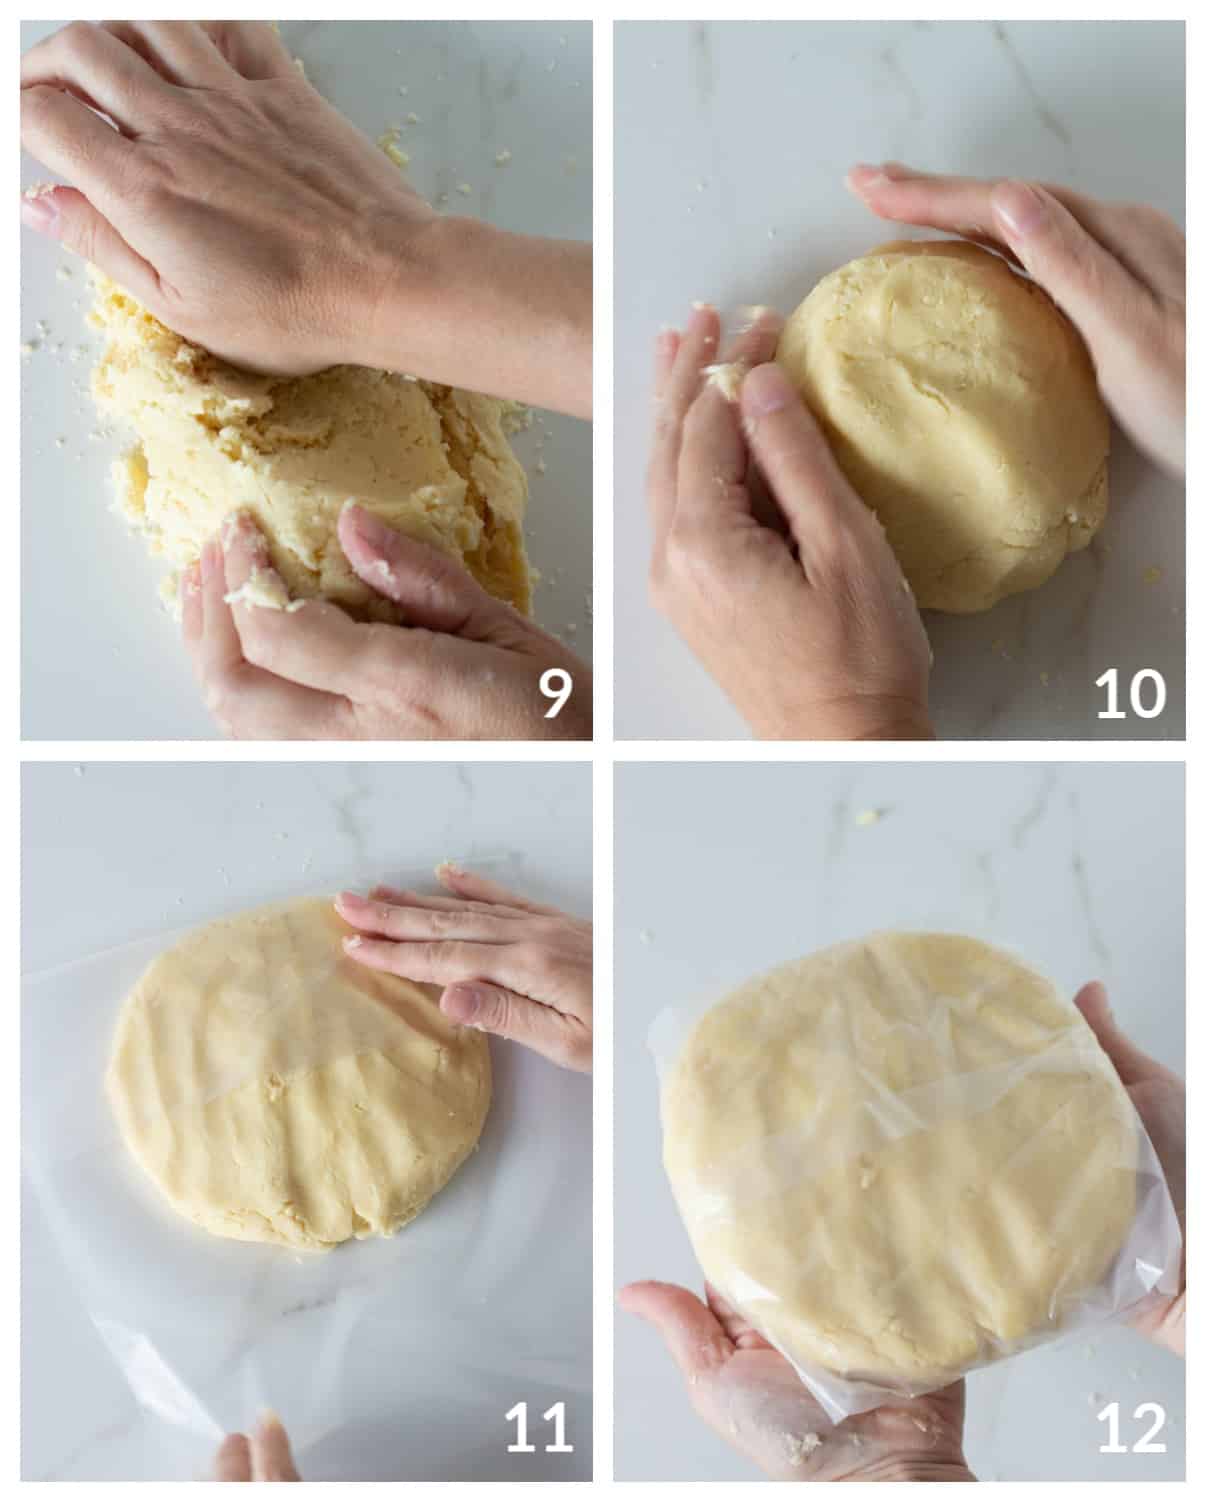 On a white marble surface, hands making pie crust dough ball, image collage